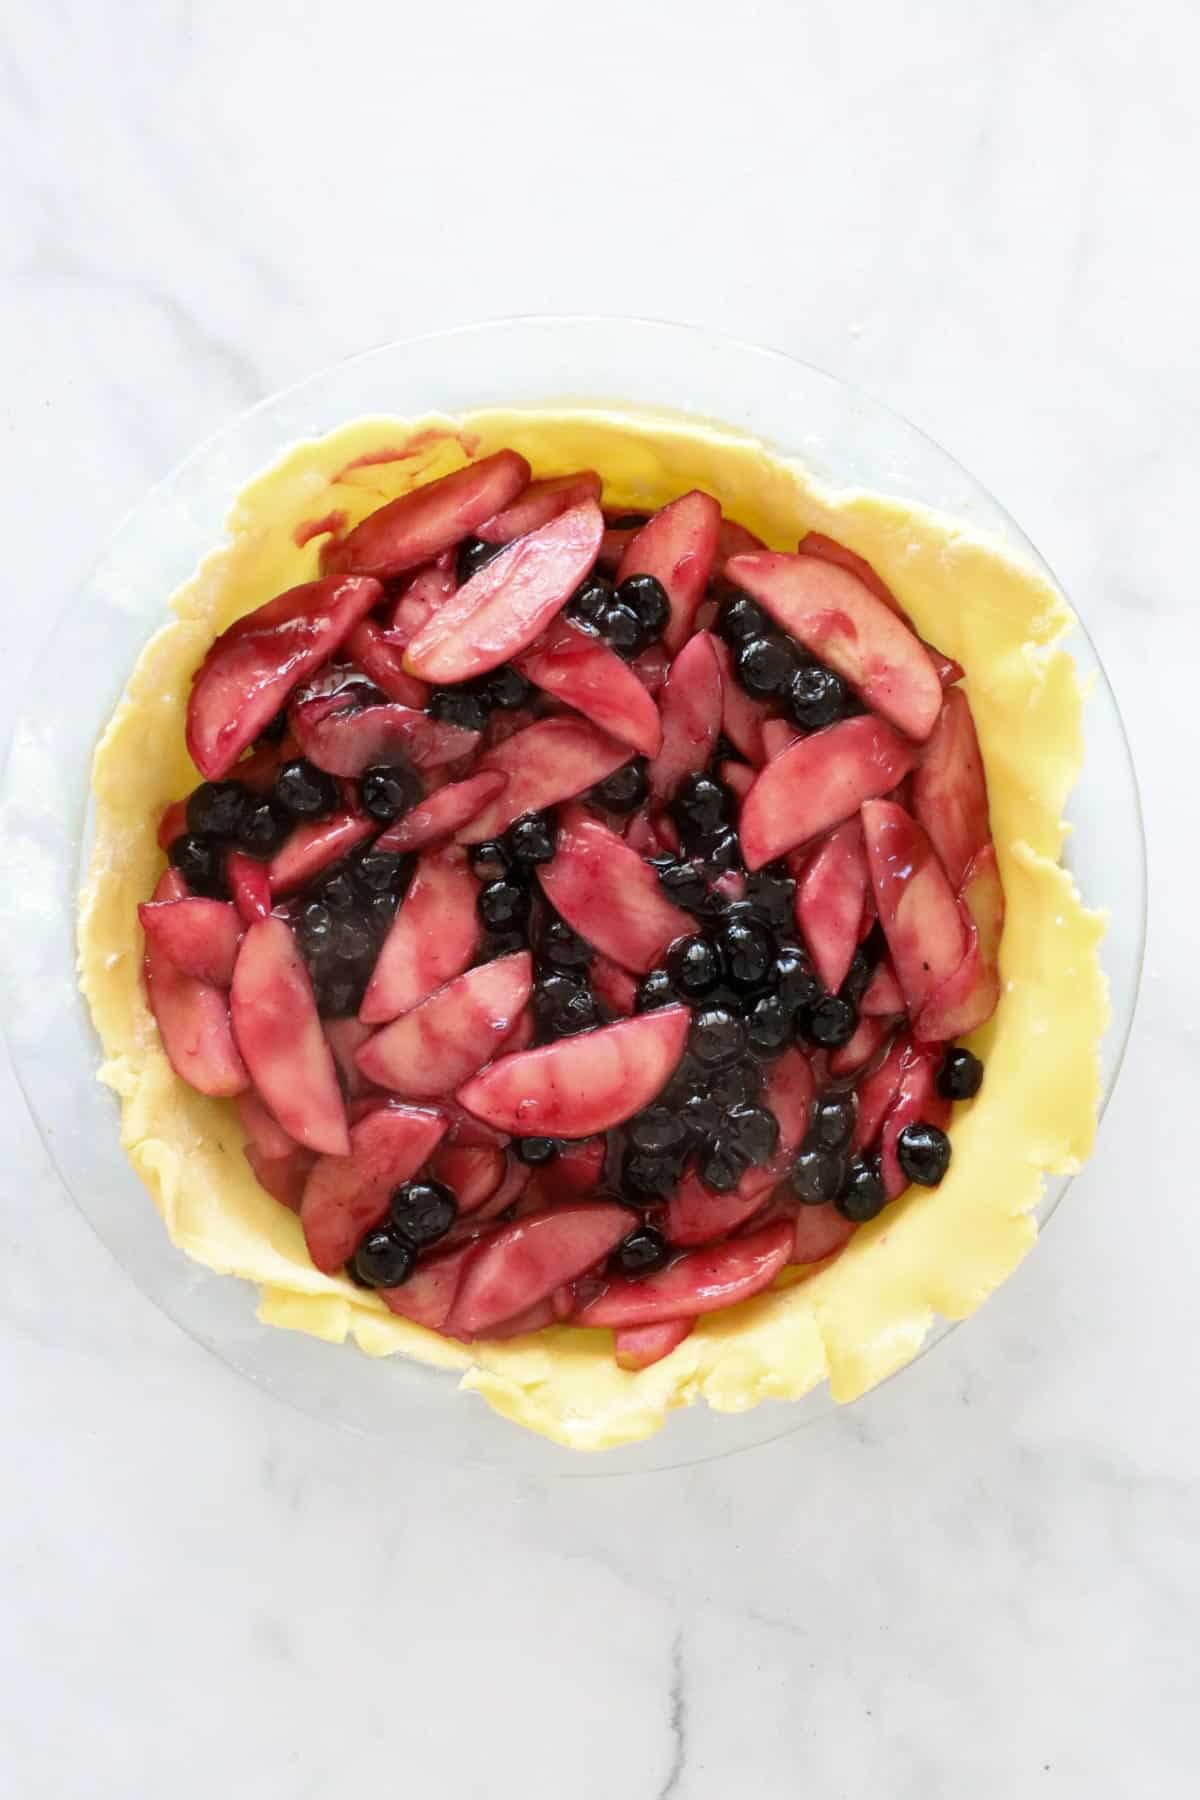 Unbaked pie crust filled with cooked apples and blueberries